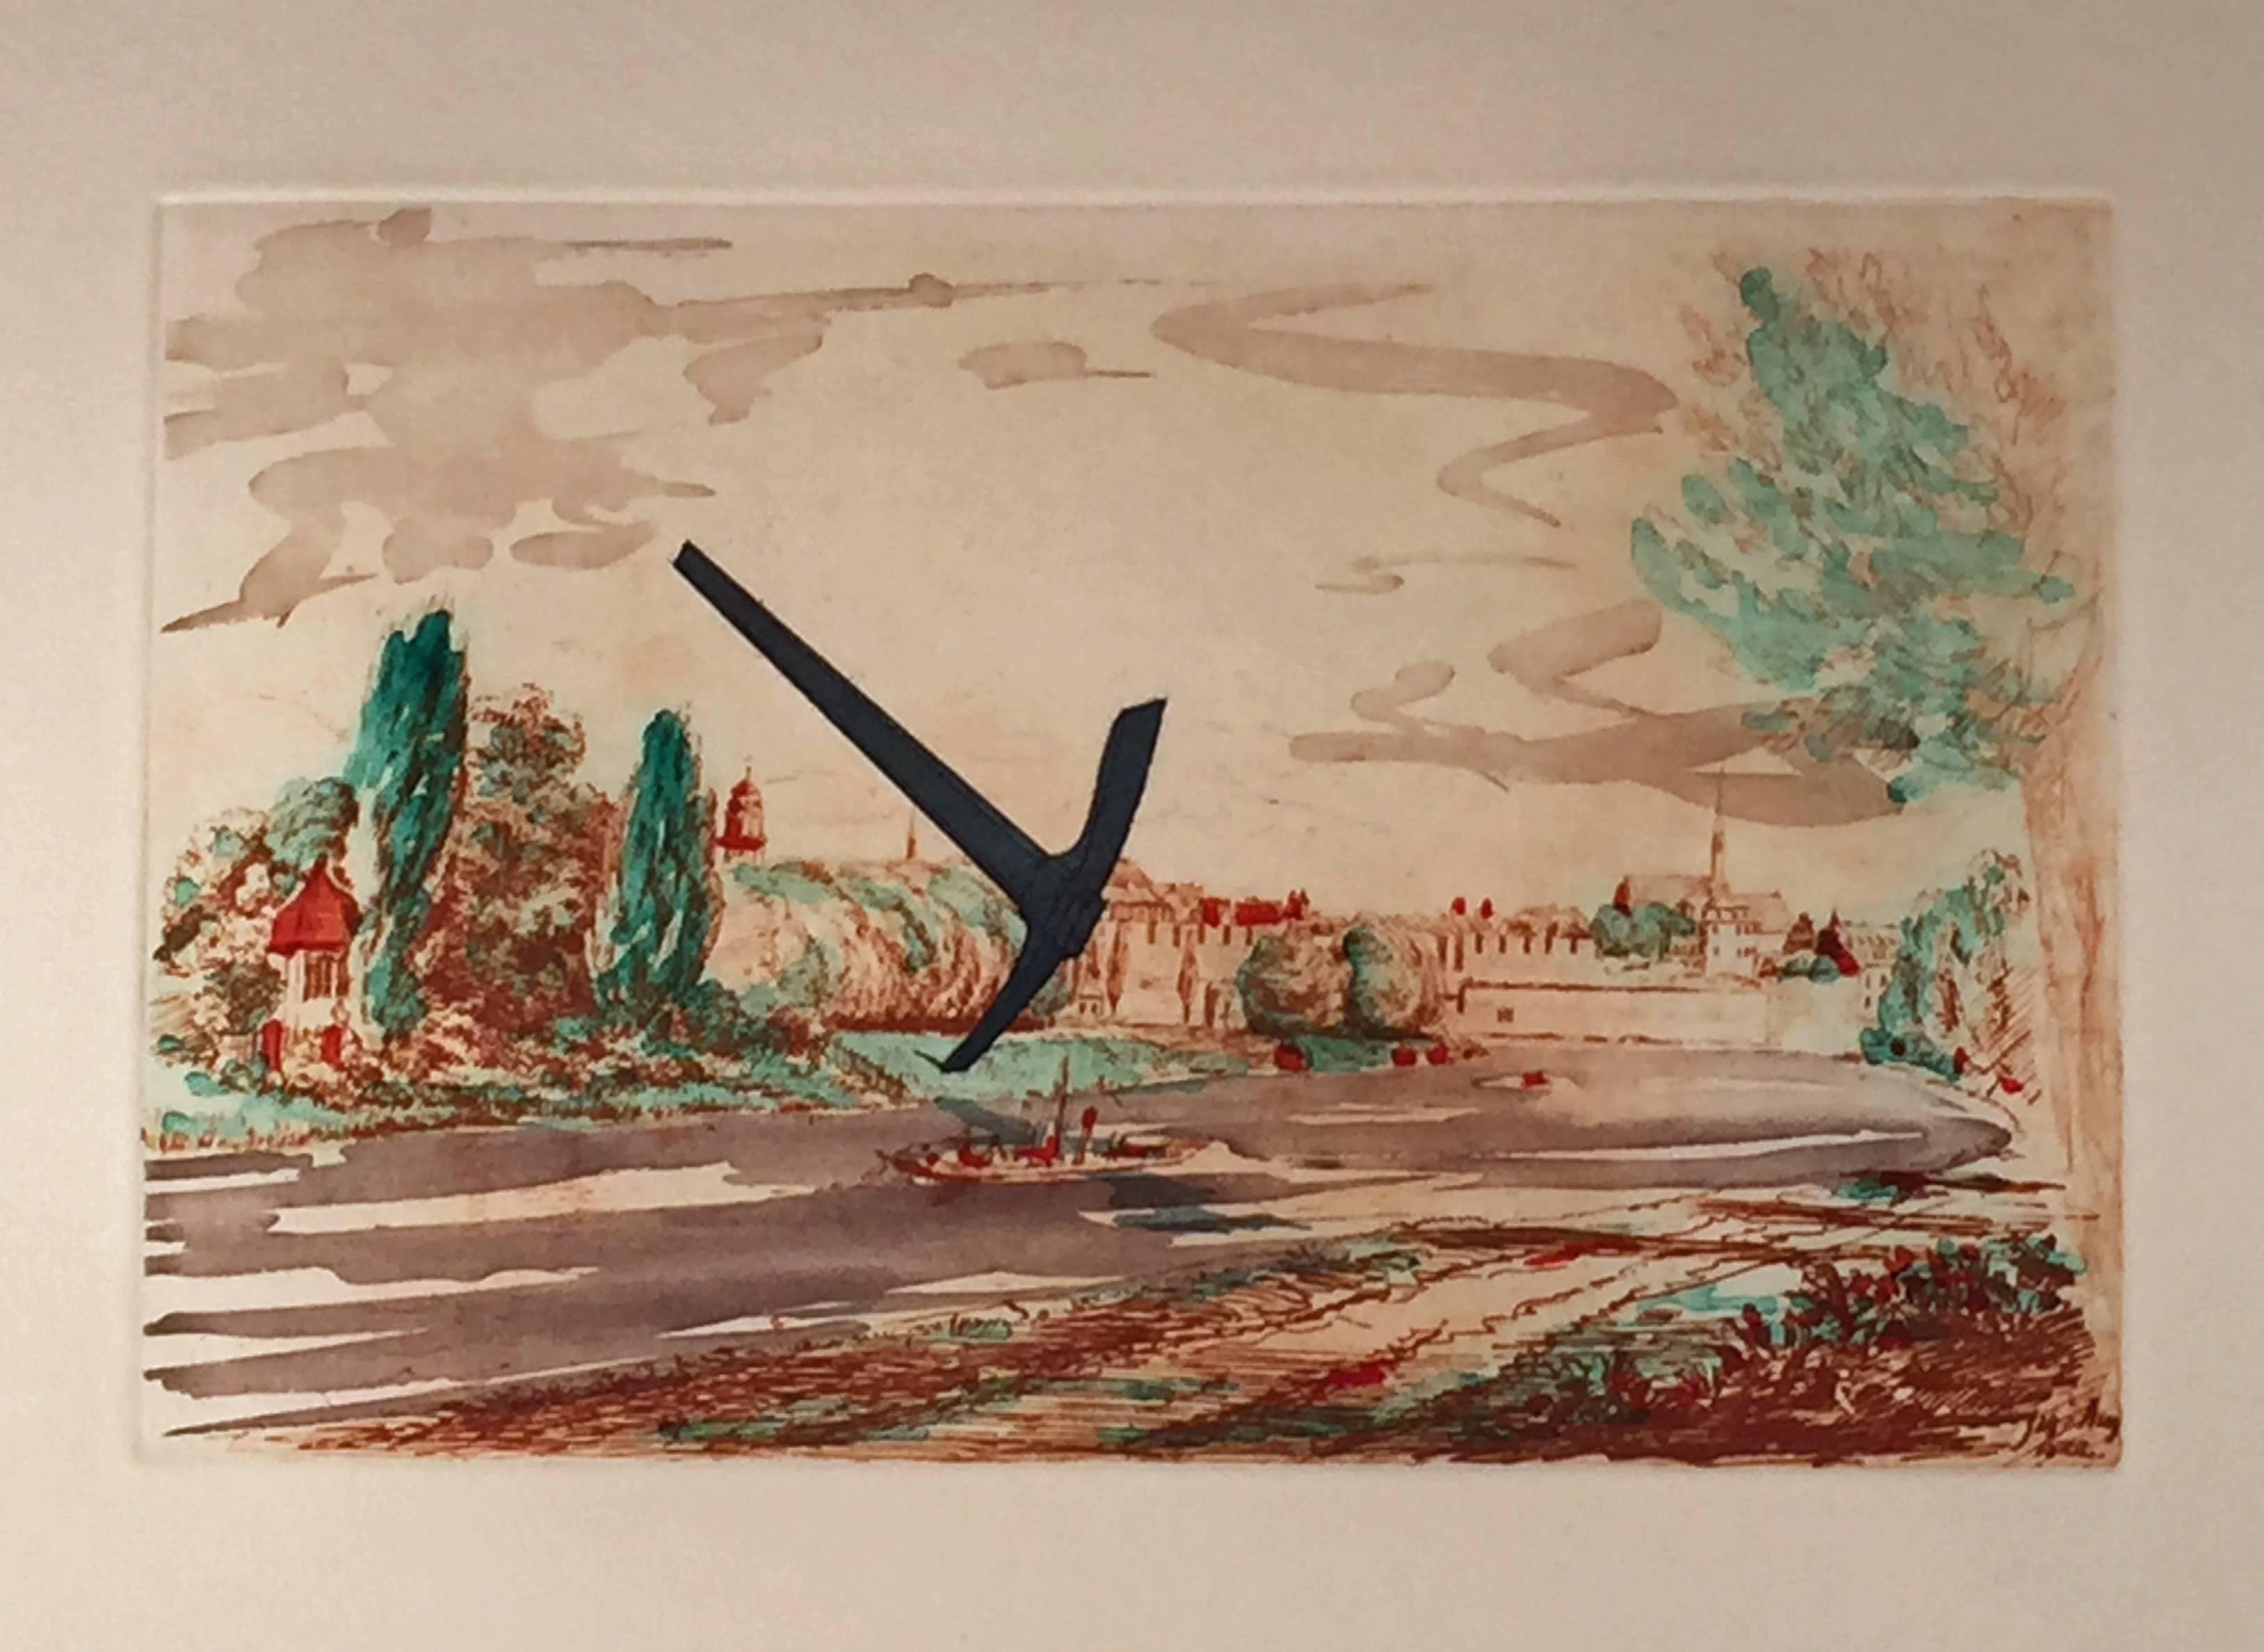 Claes Oldenburg Landscape Print - THE SPITZHACKE, 1982 SUPERIMPOSED ON A DRAWING OF THE SITE BY EMIL LUDWIG GRIMM,